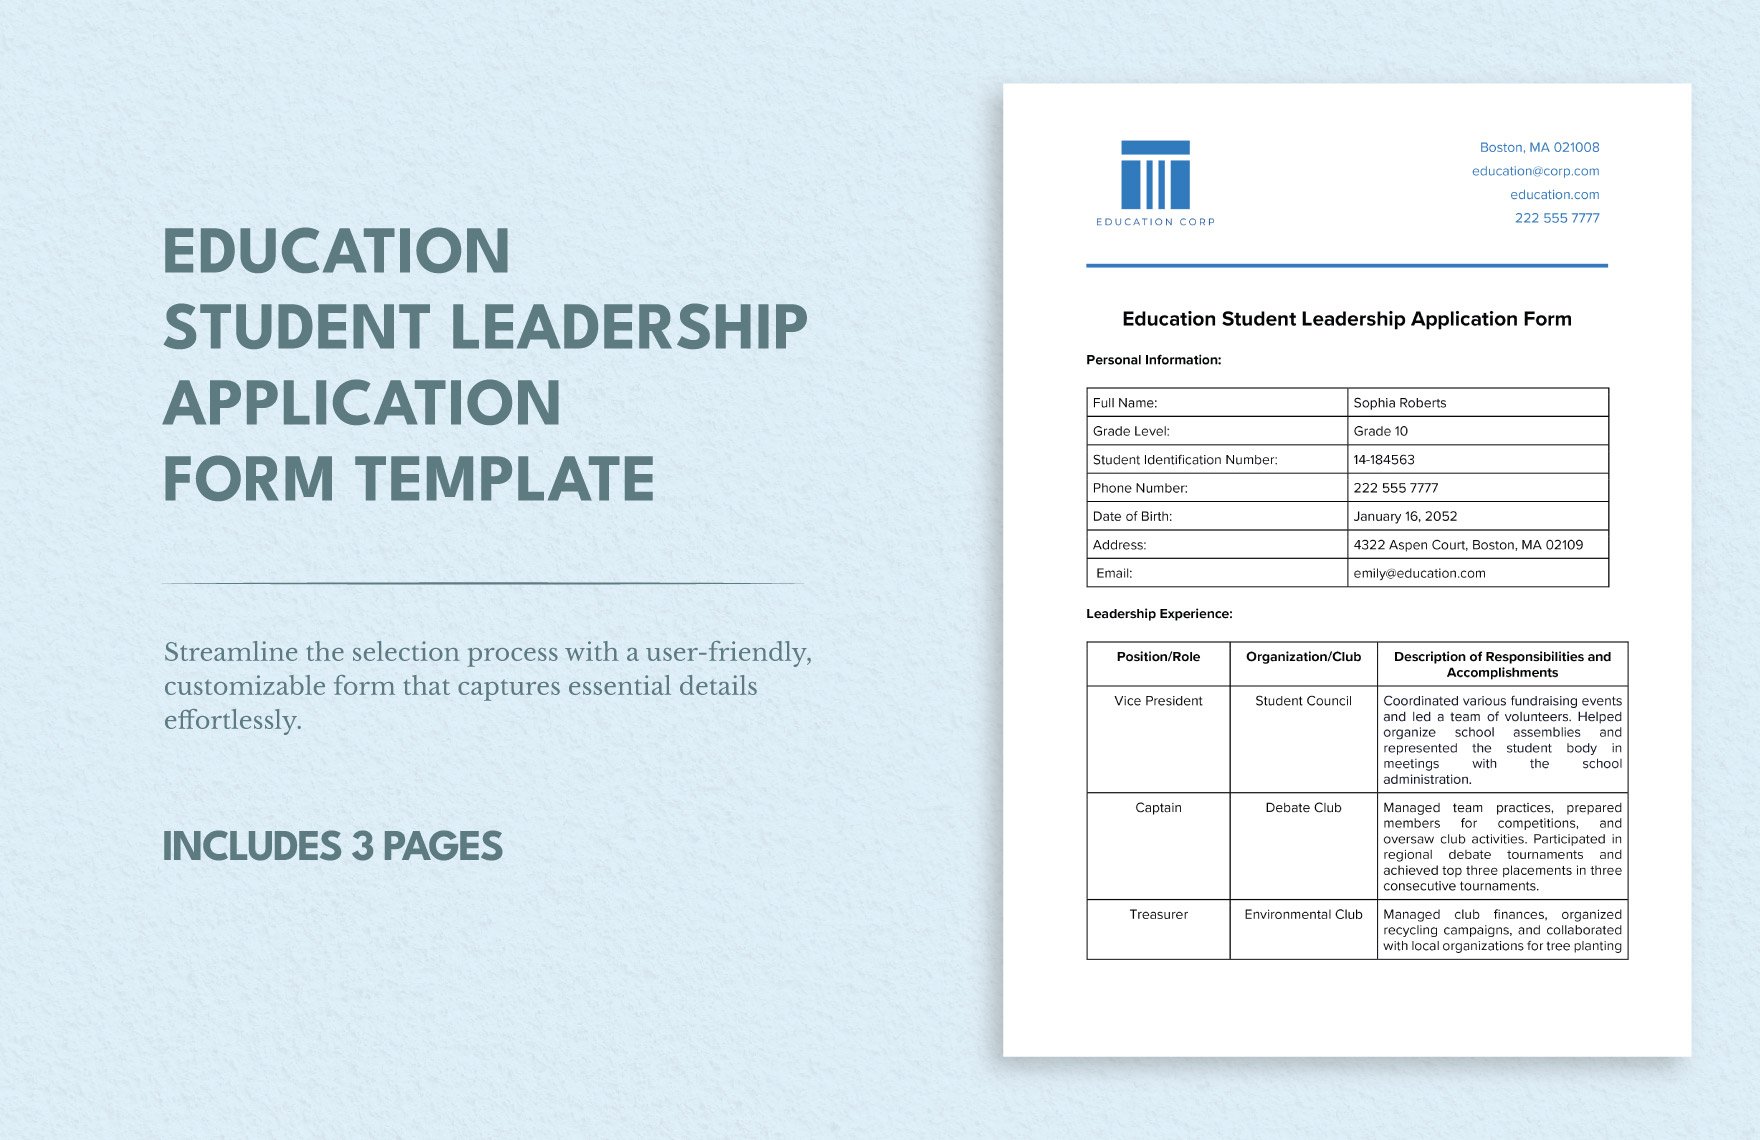 Education Student Leadership Application Form Template